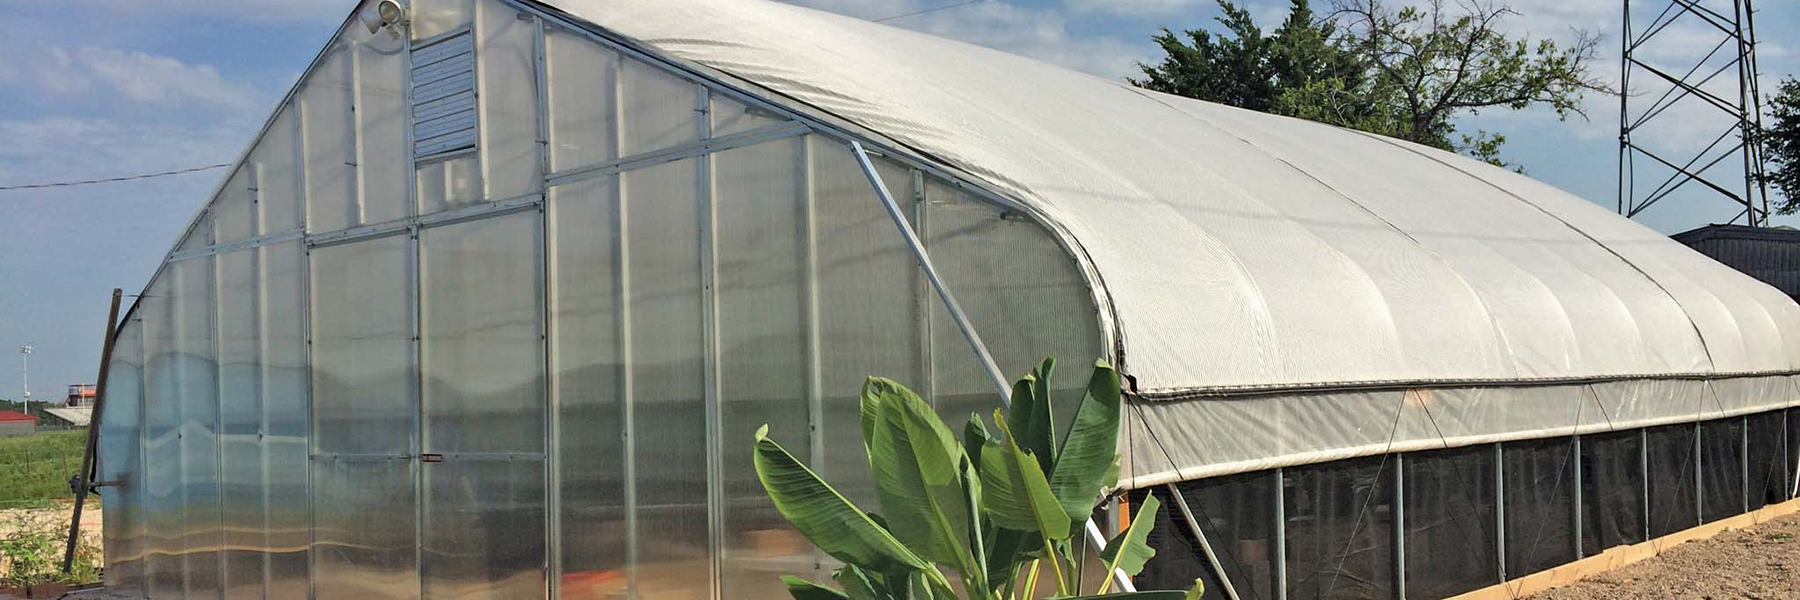 gothic arch greenhouses